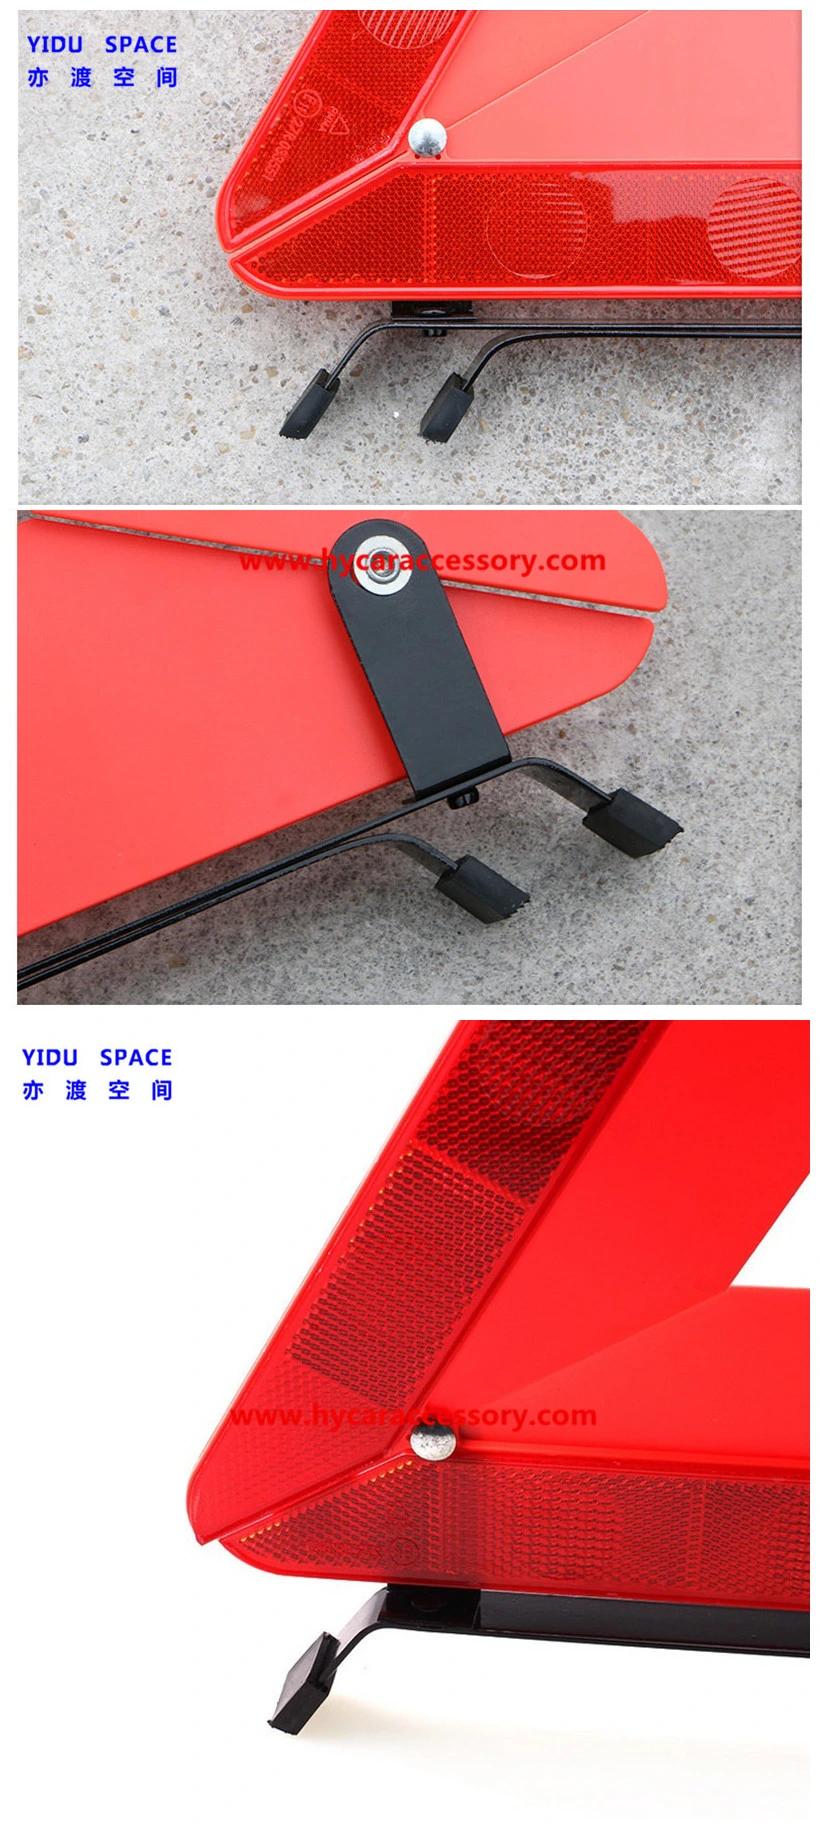 CE Certification Wholesale Warning Sign Road Safety Emergency Reflective Folded Foldable Reflective Auto Car Warning Triangle for Traffic Safety